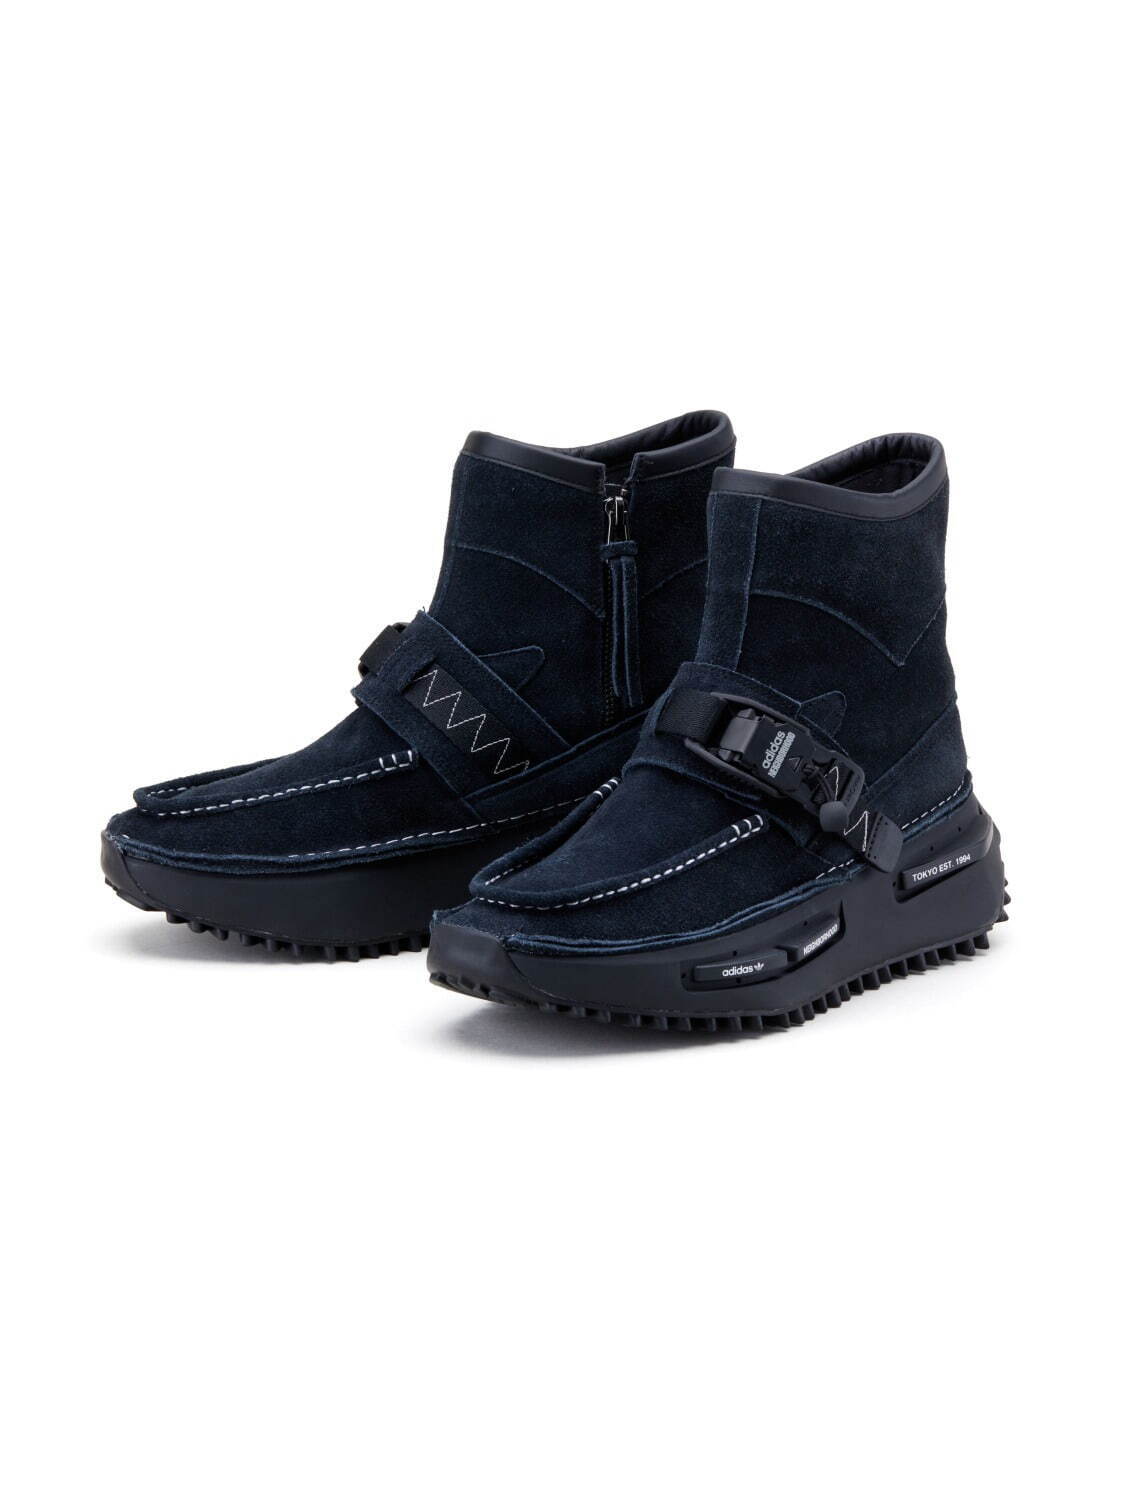 NMD_S1 N BOOTS 36,300円